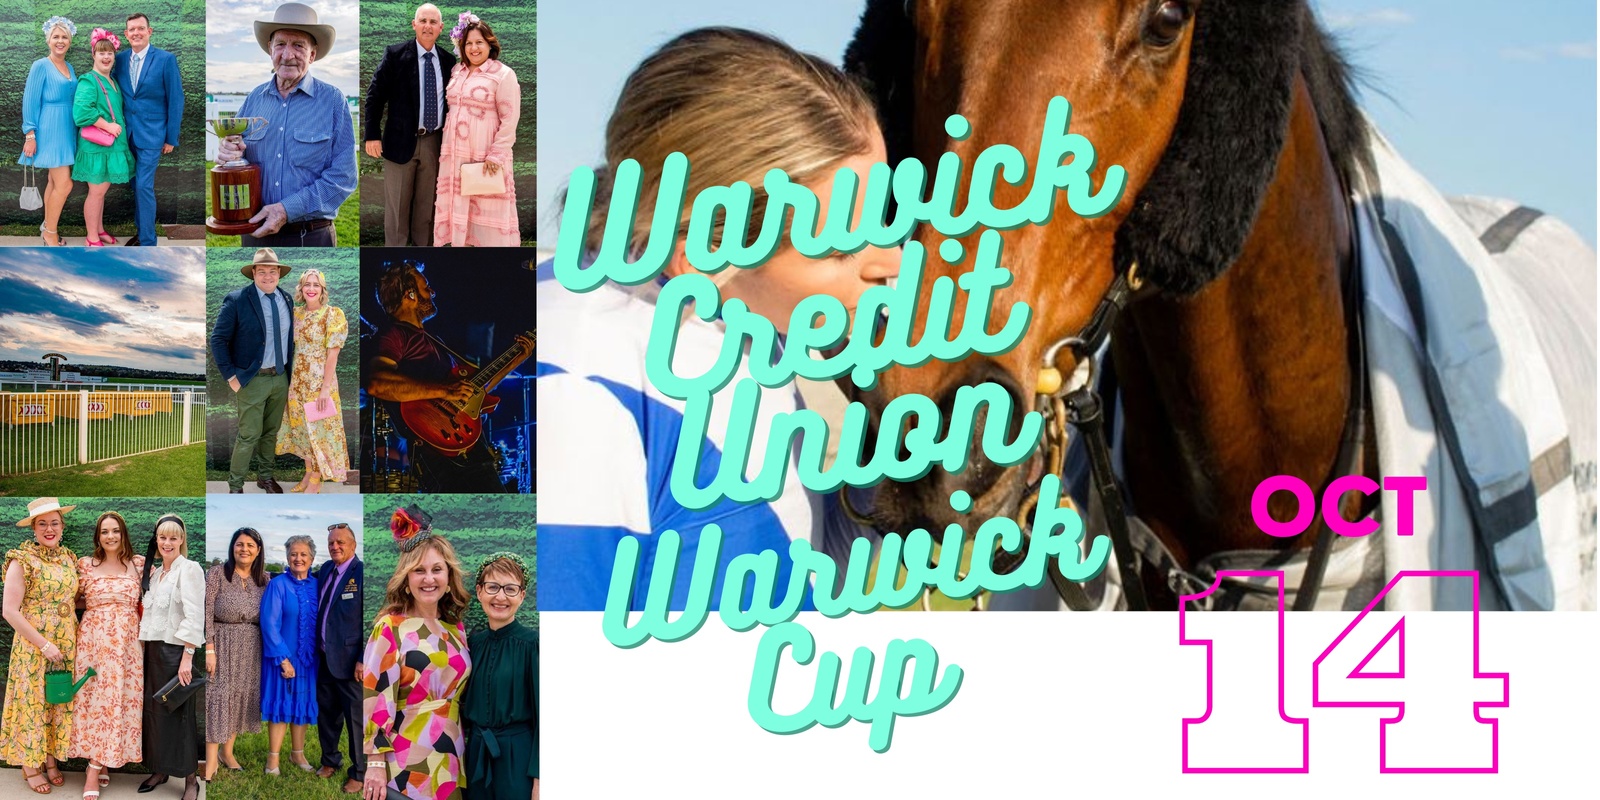 Banner image for 162nd Warwick Credit Union Warwick Cup